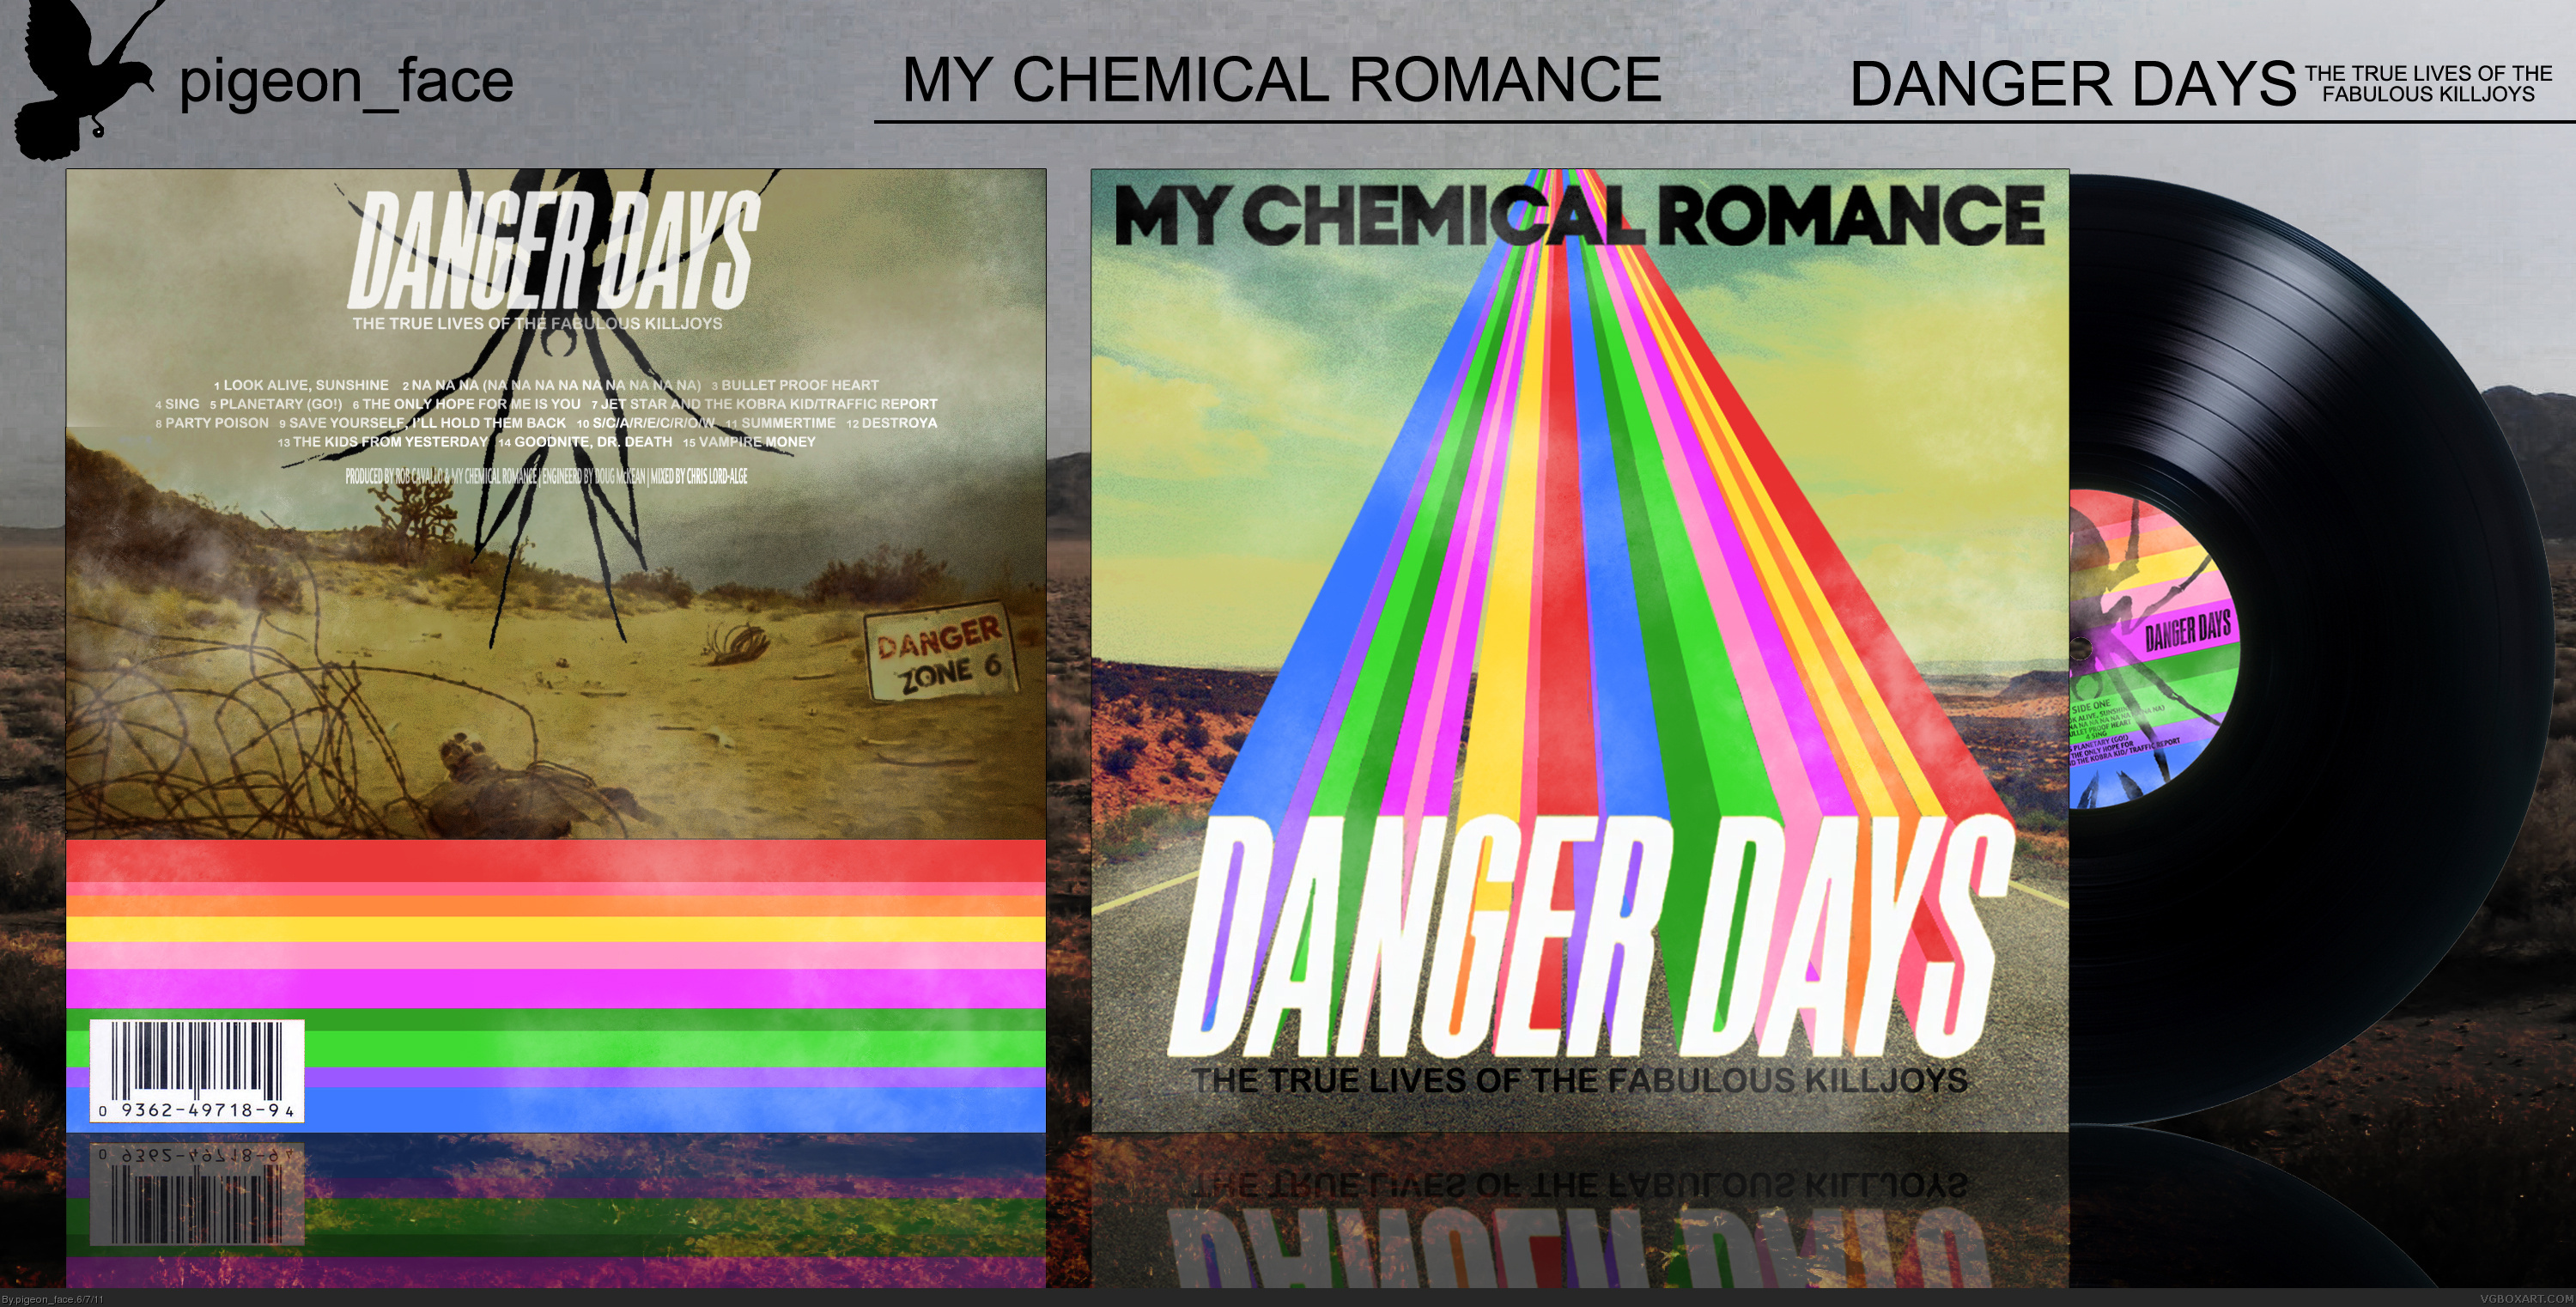 My Chemical Romance: Danger Days Music Box Art Cover by pigeon_face